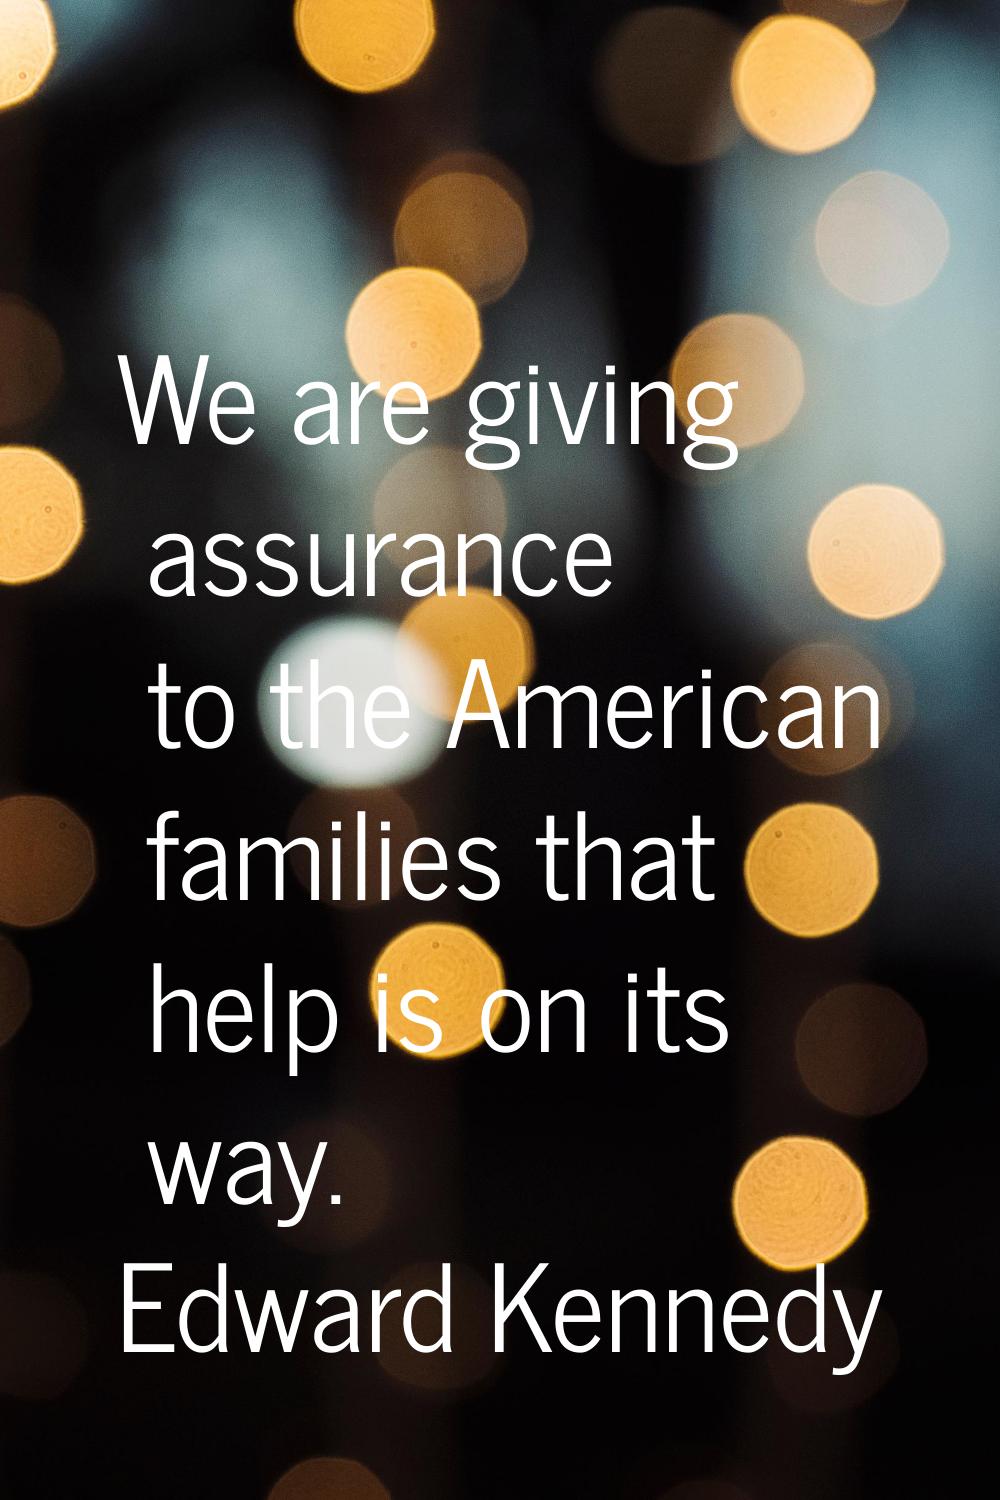 We are giving assurance to the American families that help is on its way.